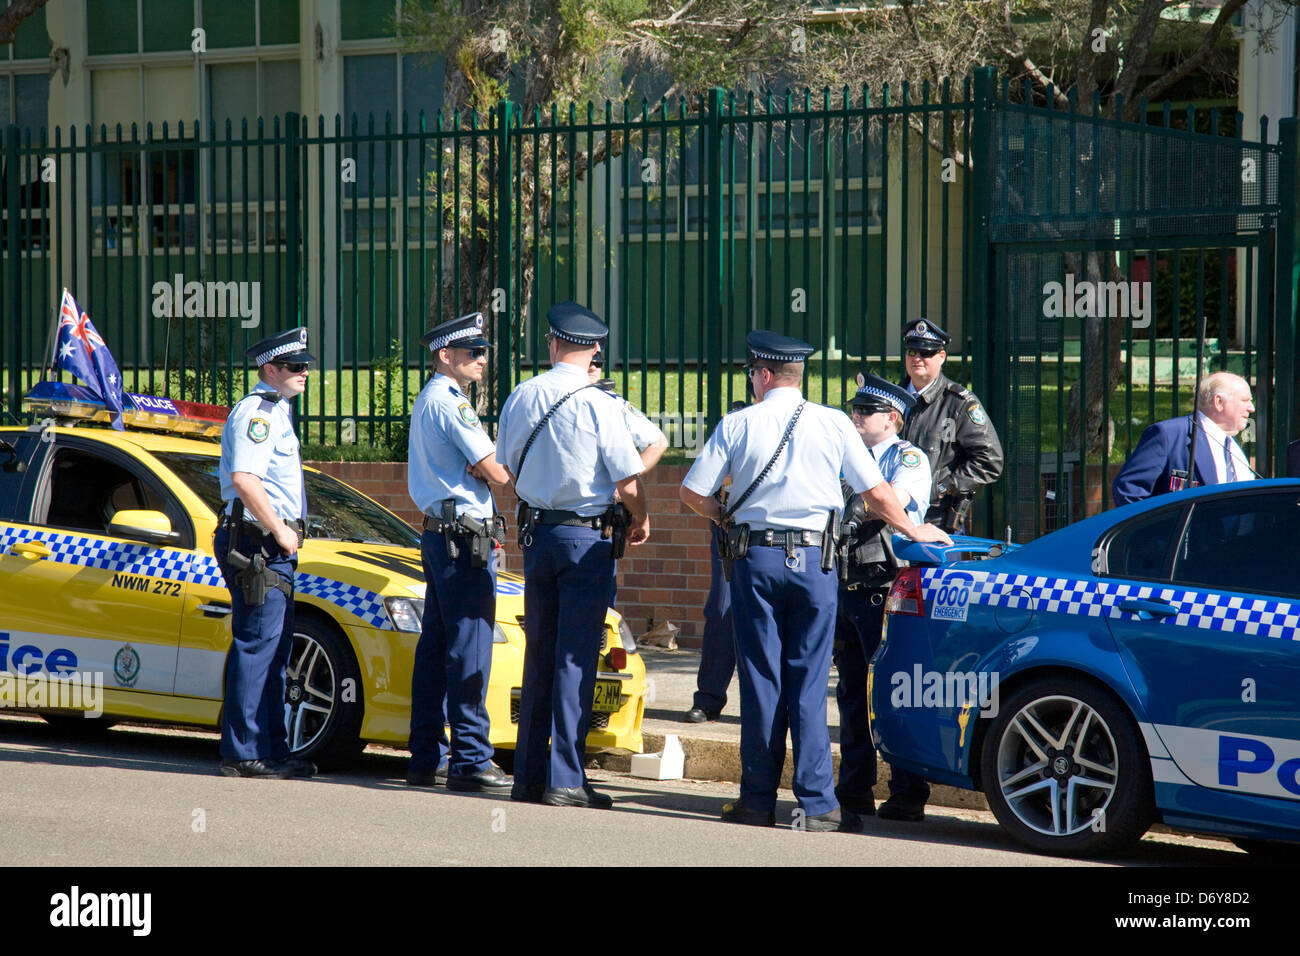 australian police officers and their vehicles in sydney,australia Stock Photo